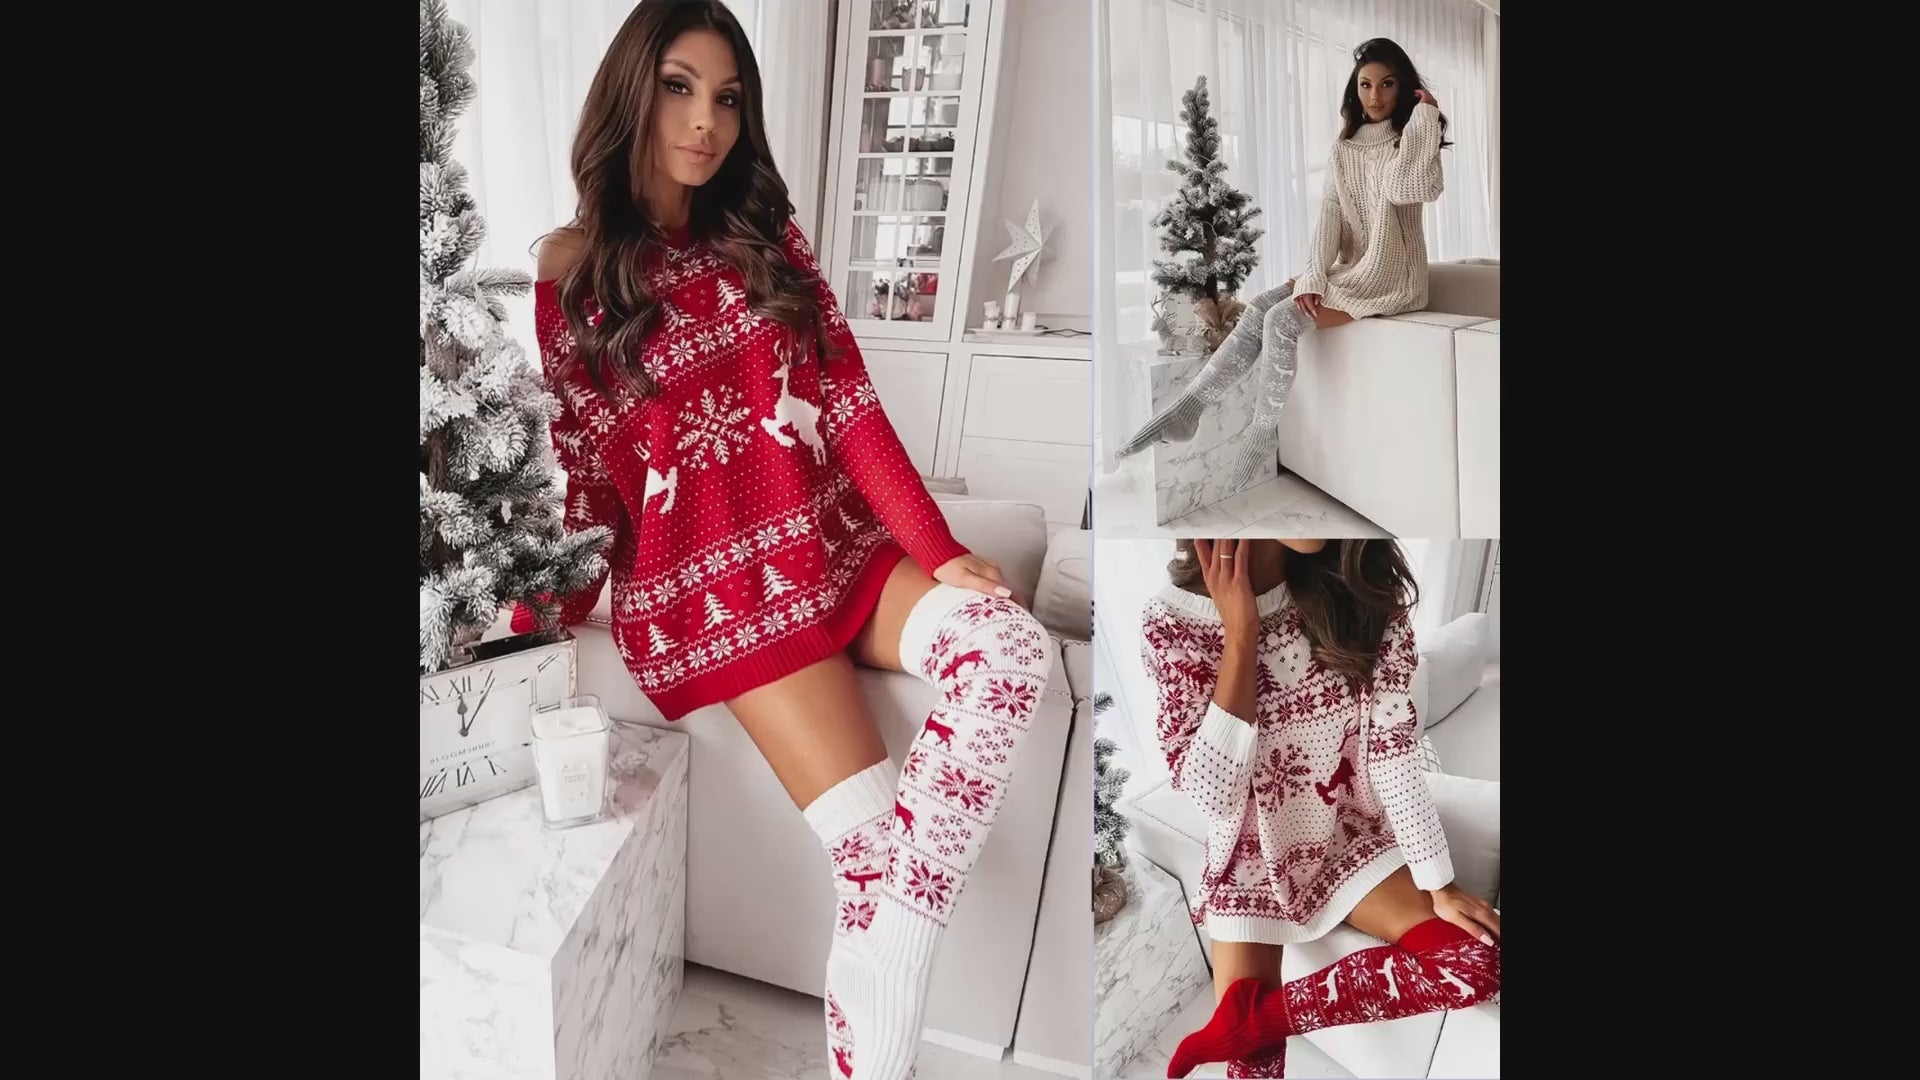 Winter Christmas Warm Knitted Women Stocking Beautiful Elk Snowflake  Jacquard Over-the-knee Casual Long Socks For Ladies Gifts Free Size at Rs  4000.25, Women Clothes